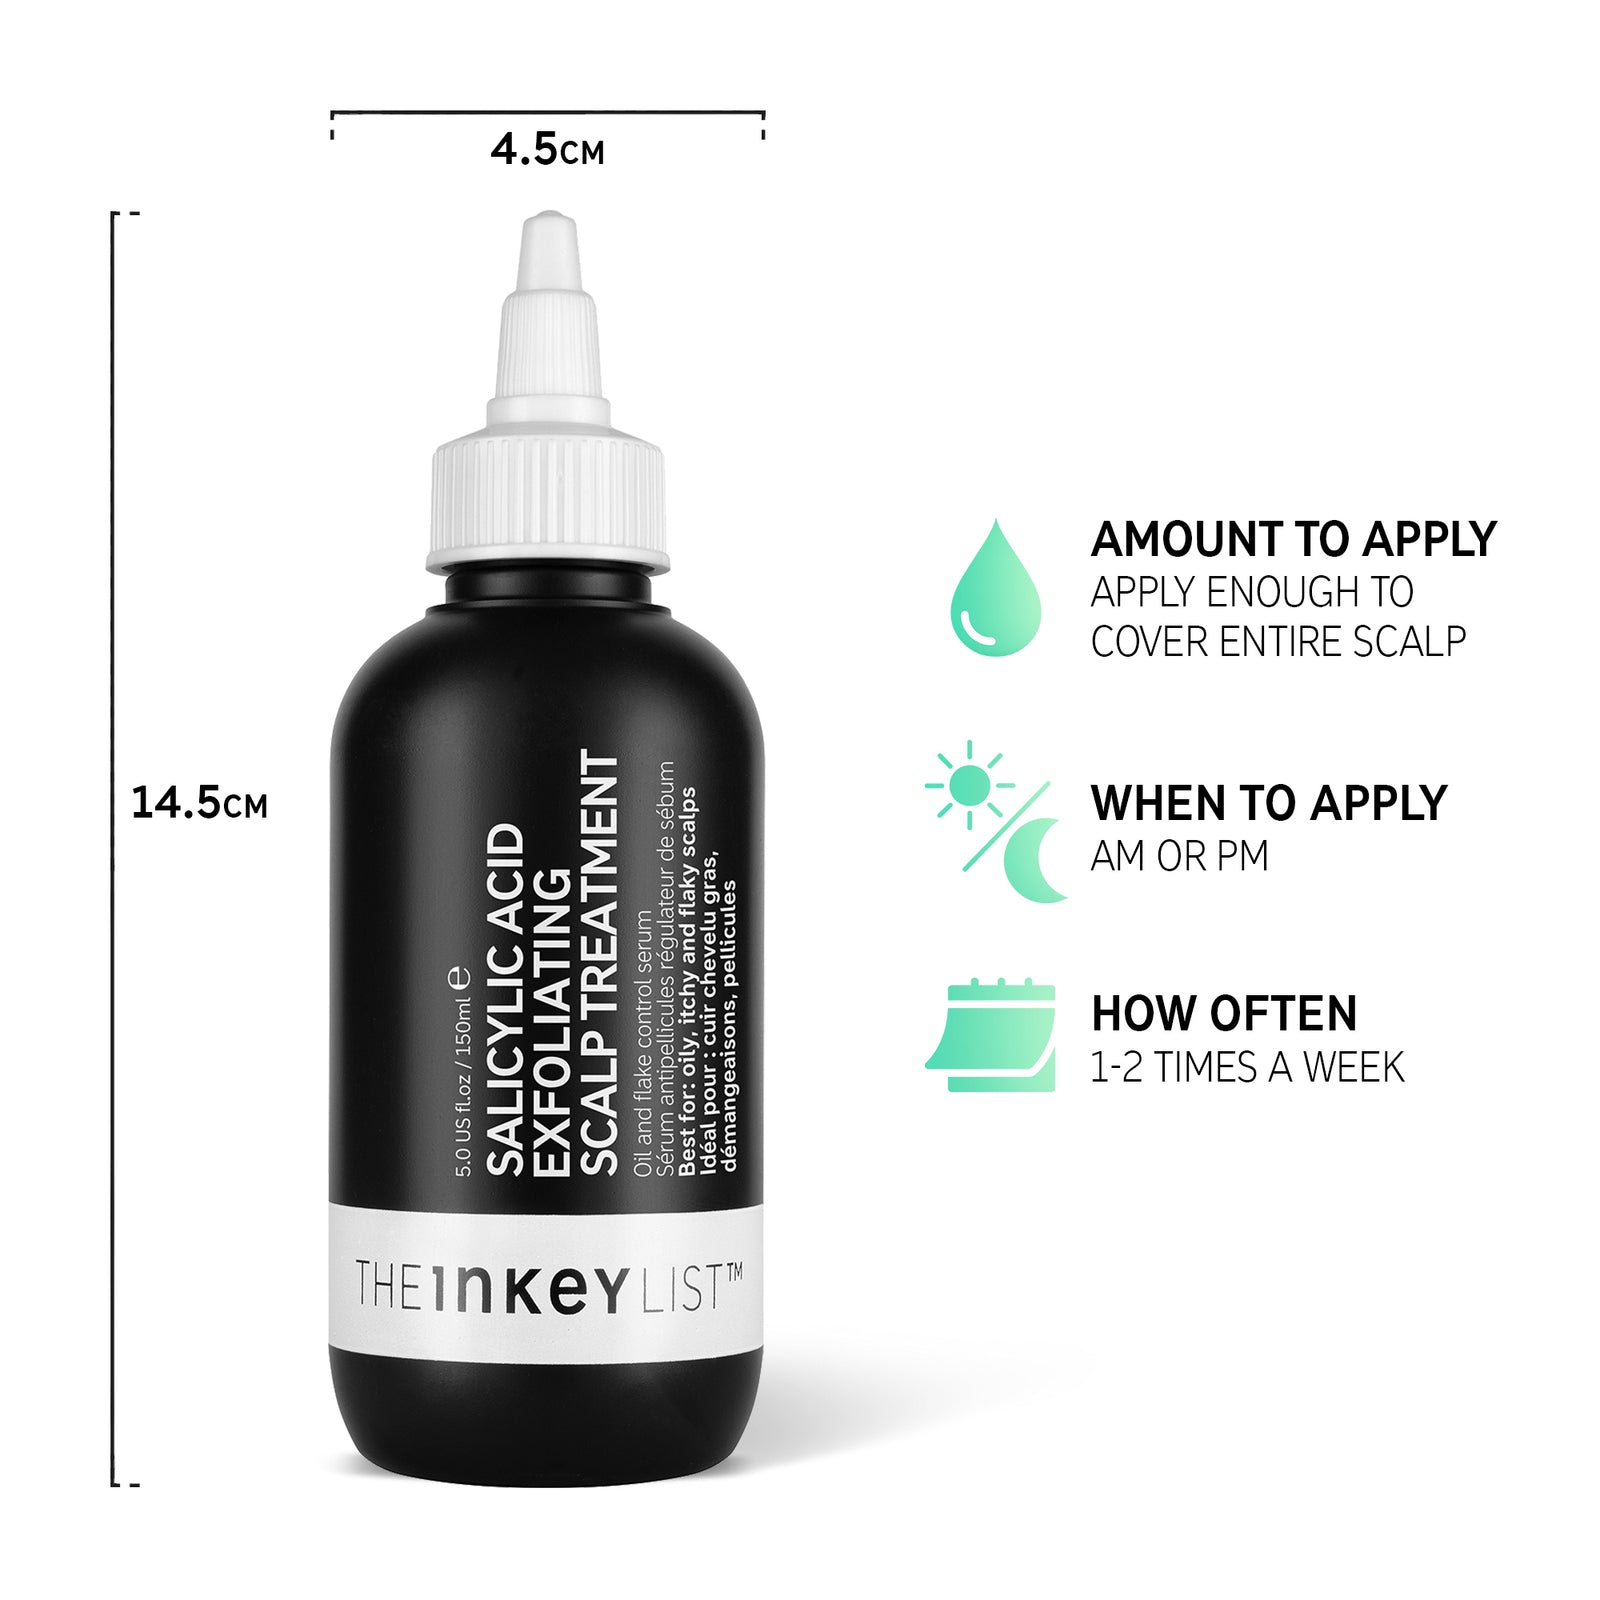 Clean & Healthy Scalp Duo Salicylic Acid Exfoliating Scalp Scrub bottle infographic with bottle dimensions and text that reads 'amount to apply (enough to cover scalp), when to apply (AM or PM) and how often (1-2 times a week)'